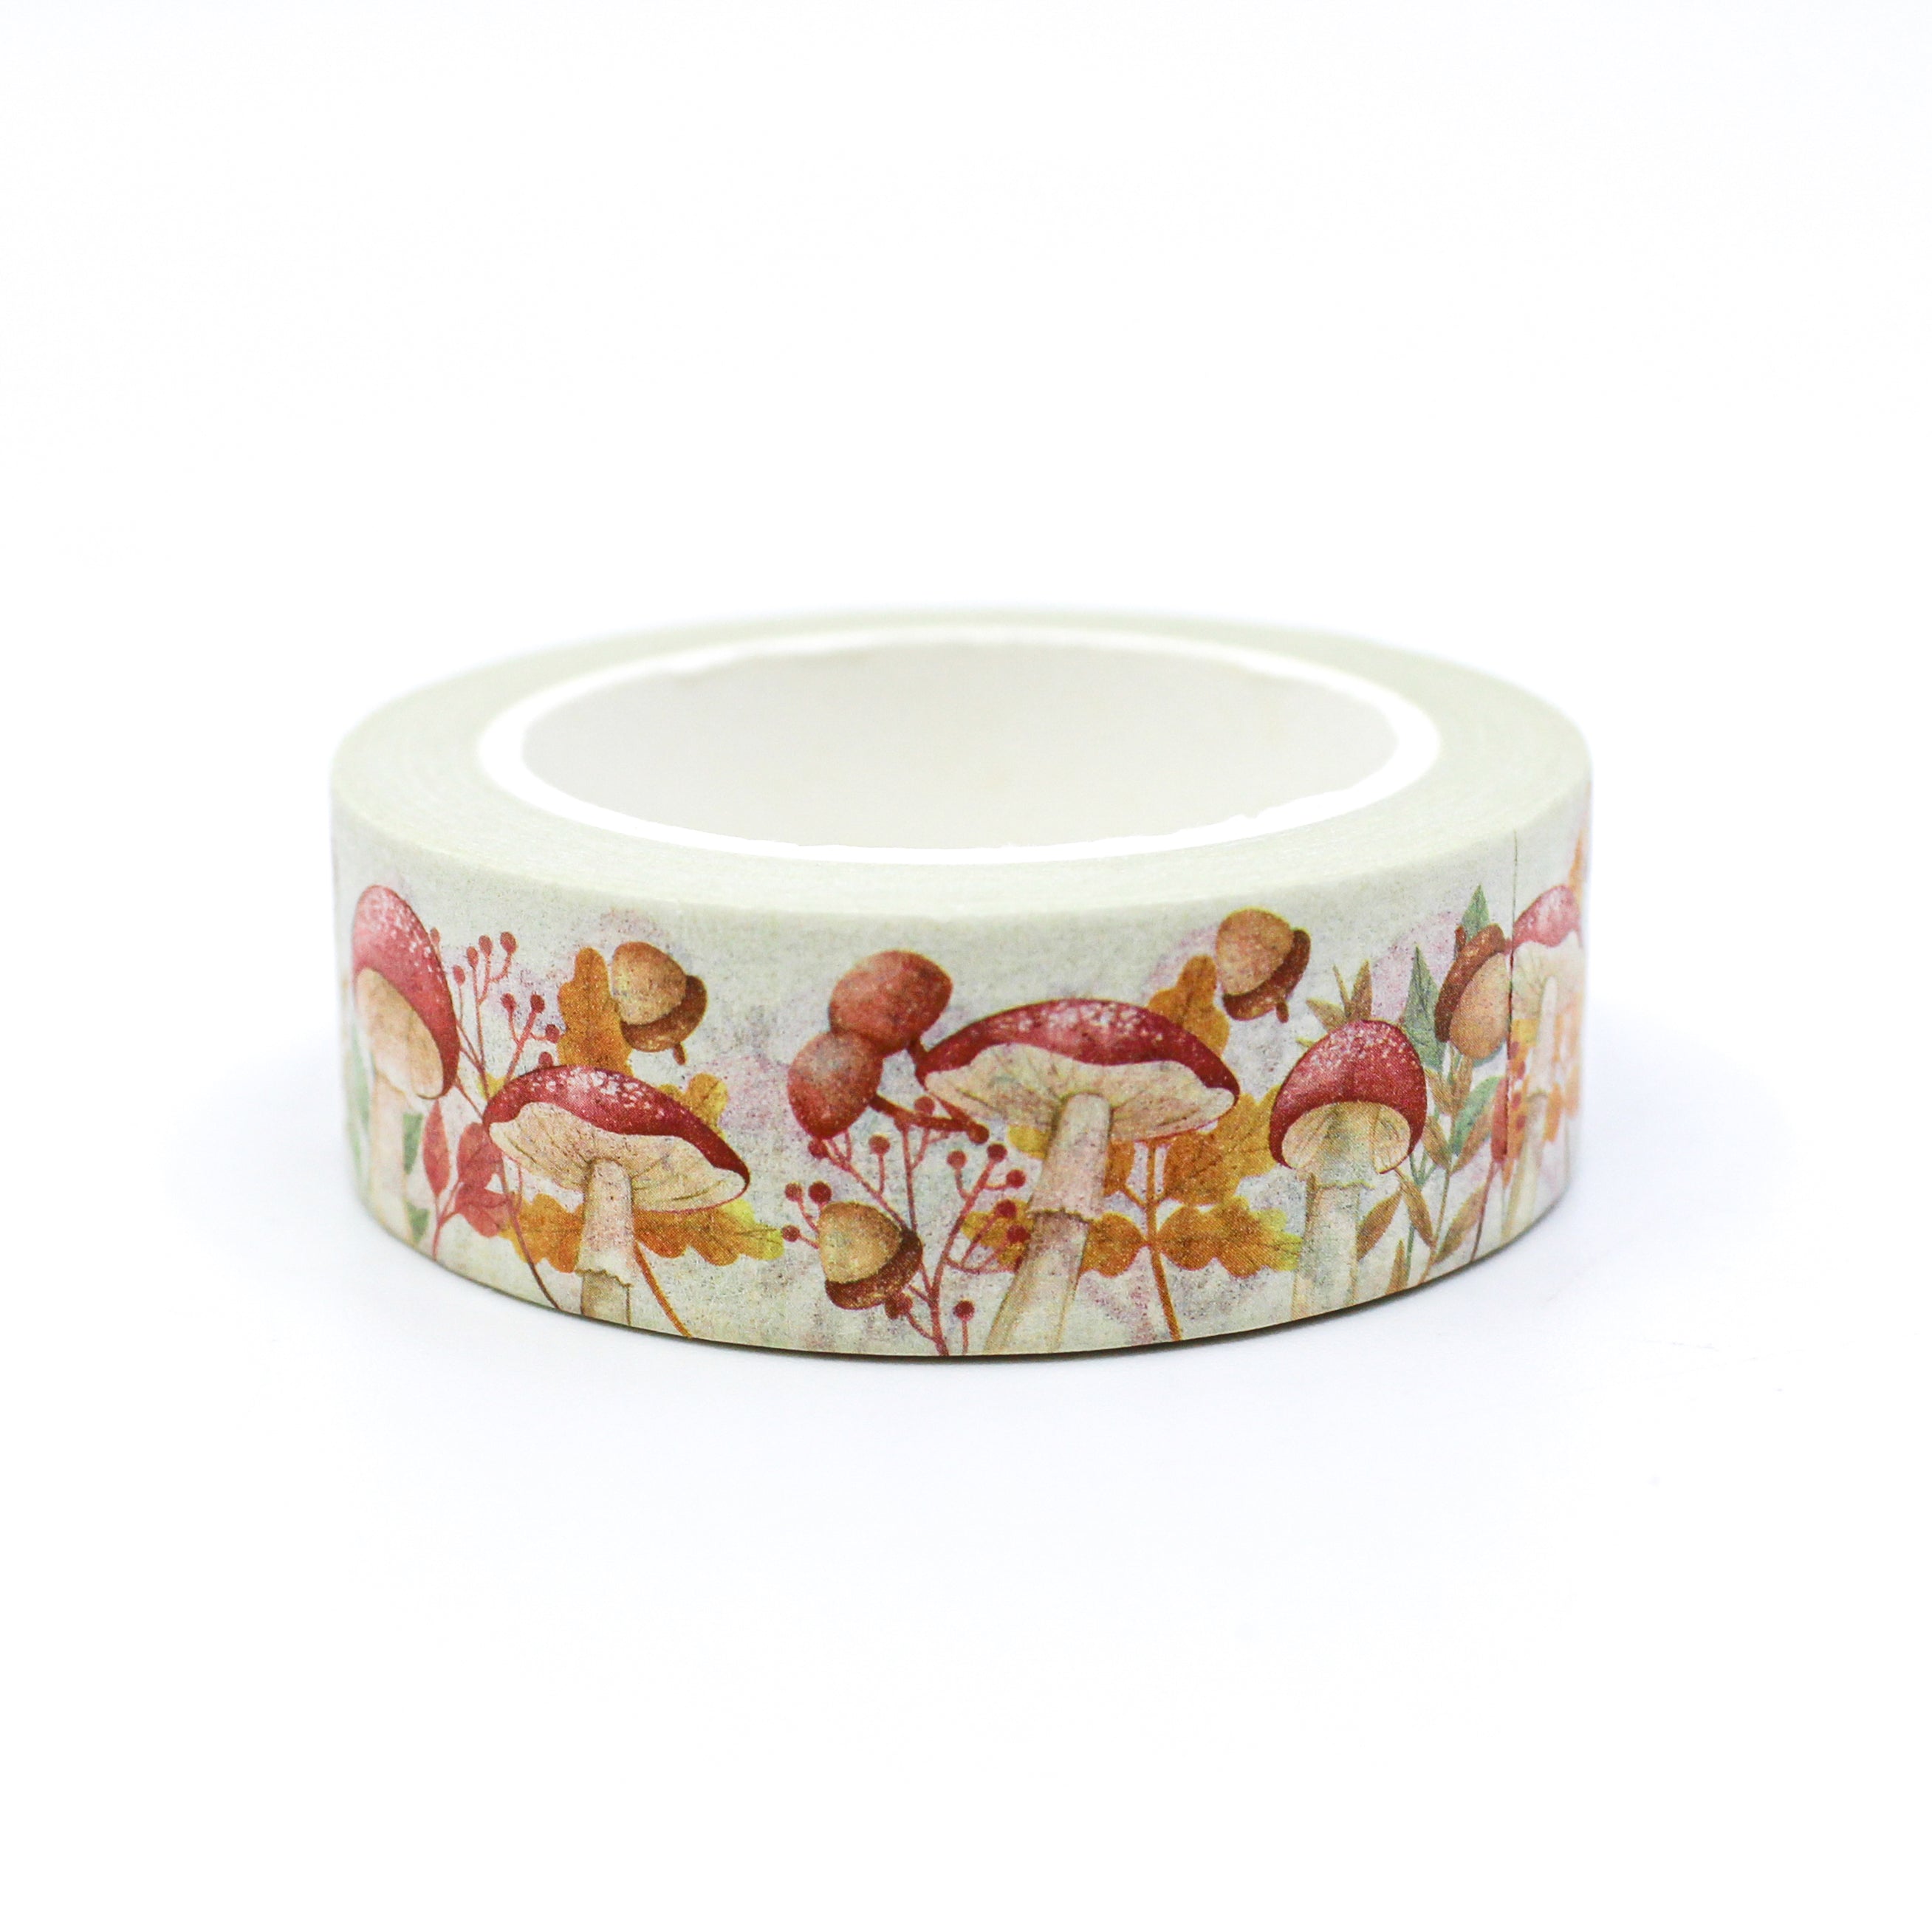 This is a colorful bright and fun mushrooms pattern washi tape from BBB Supplies Craft Shop